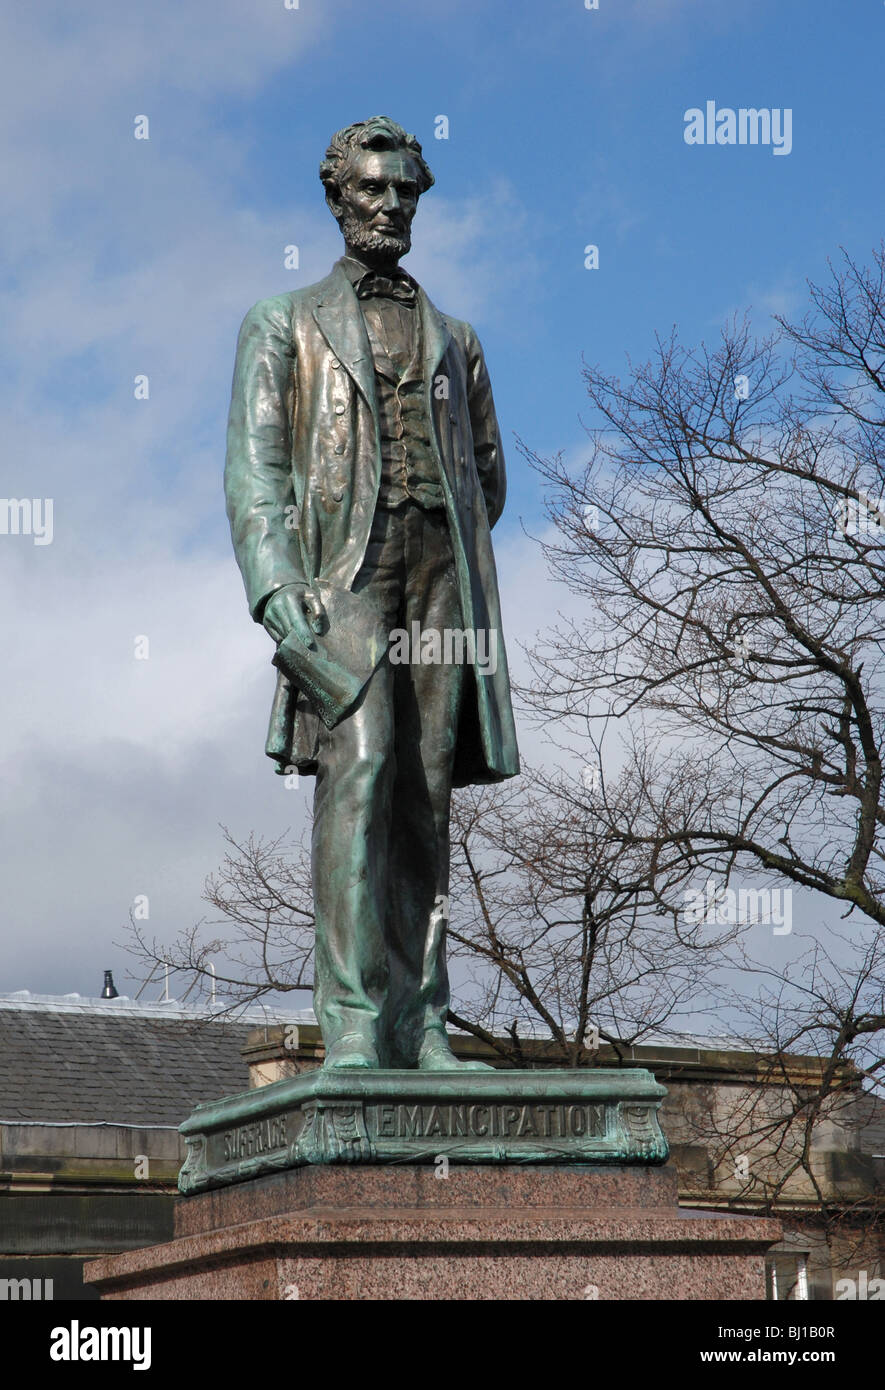 Statue of Abraham Lincoln by George Bissell on the memorial to Scottish American soldiers who fought in the American Civil War. Stock Photo